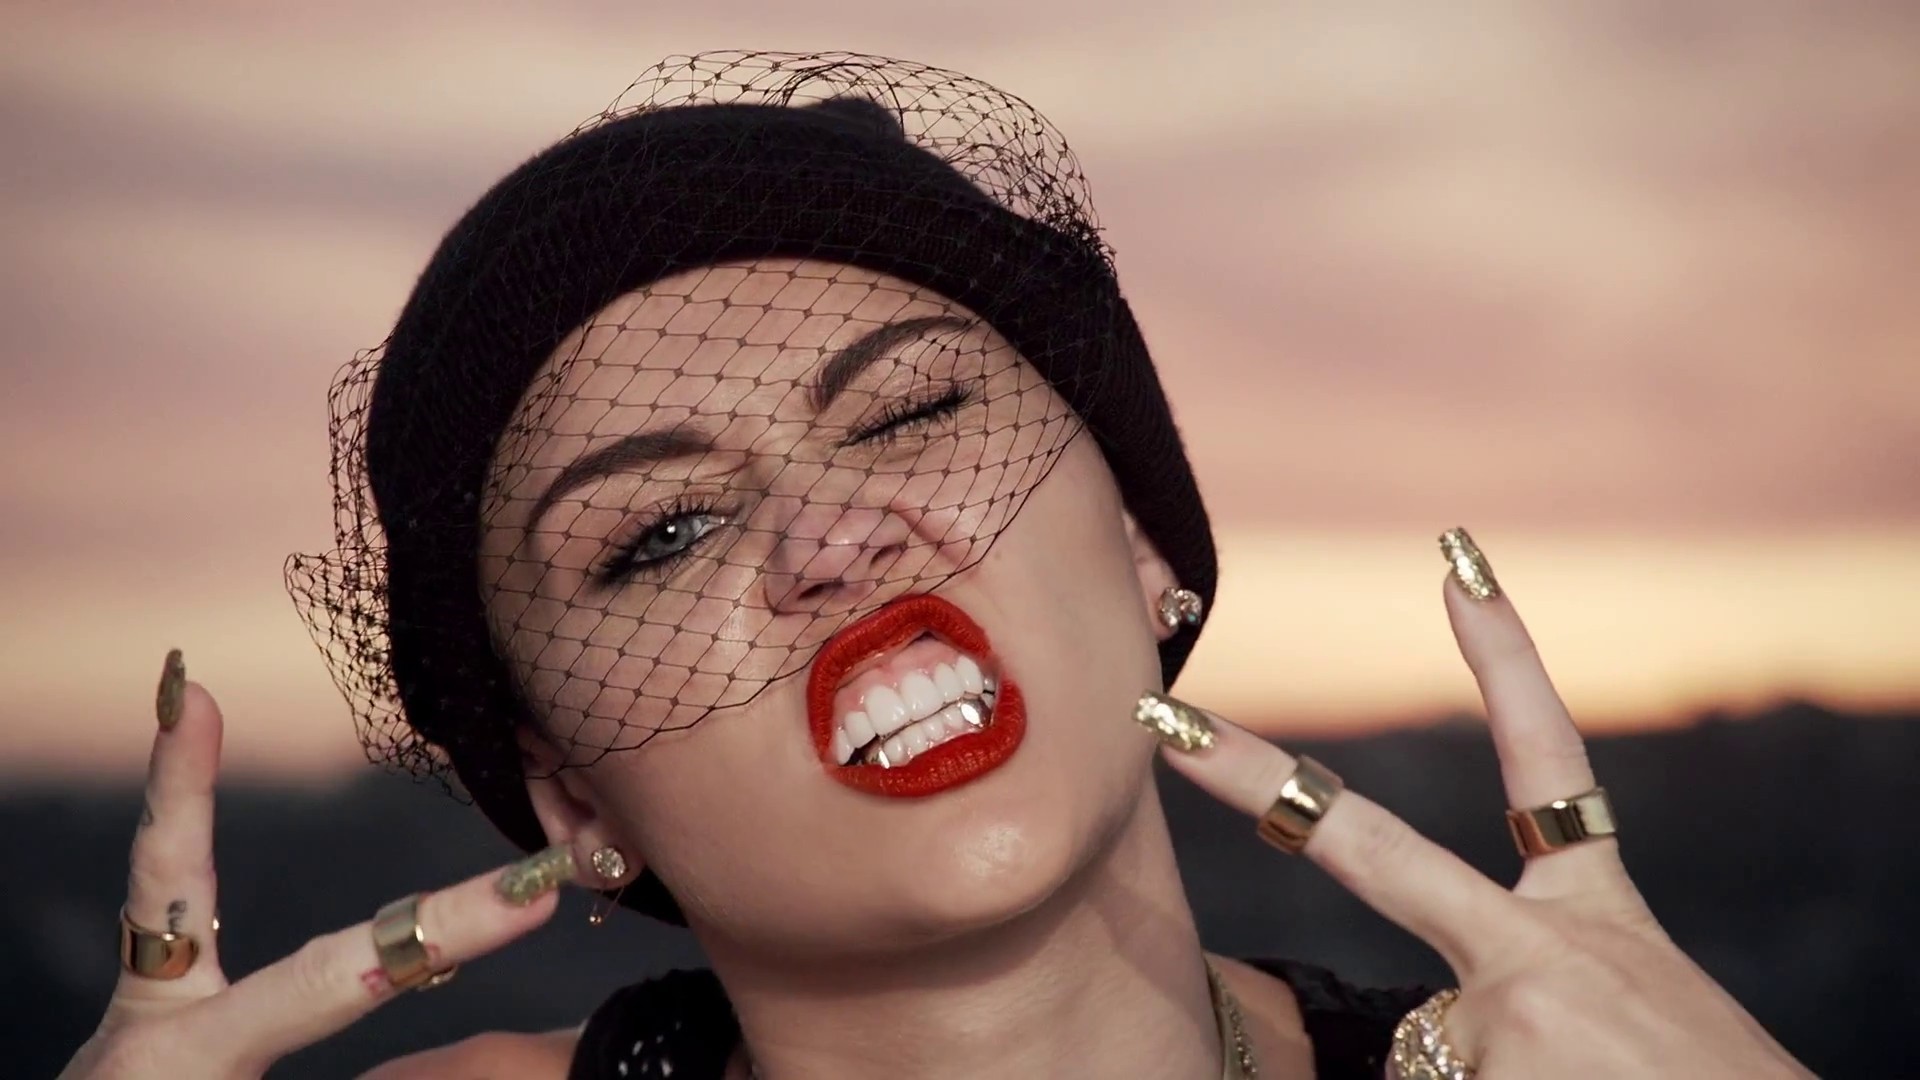 1920x1080 Miley Cyrus in Song Wink Her Eye and in Crazy Look High Quality Desktop  Background Photo